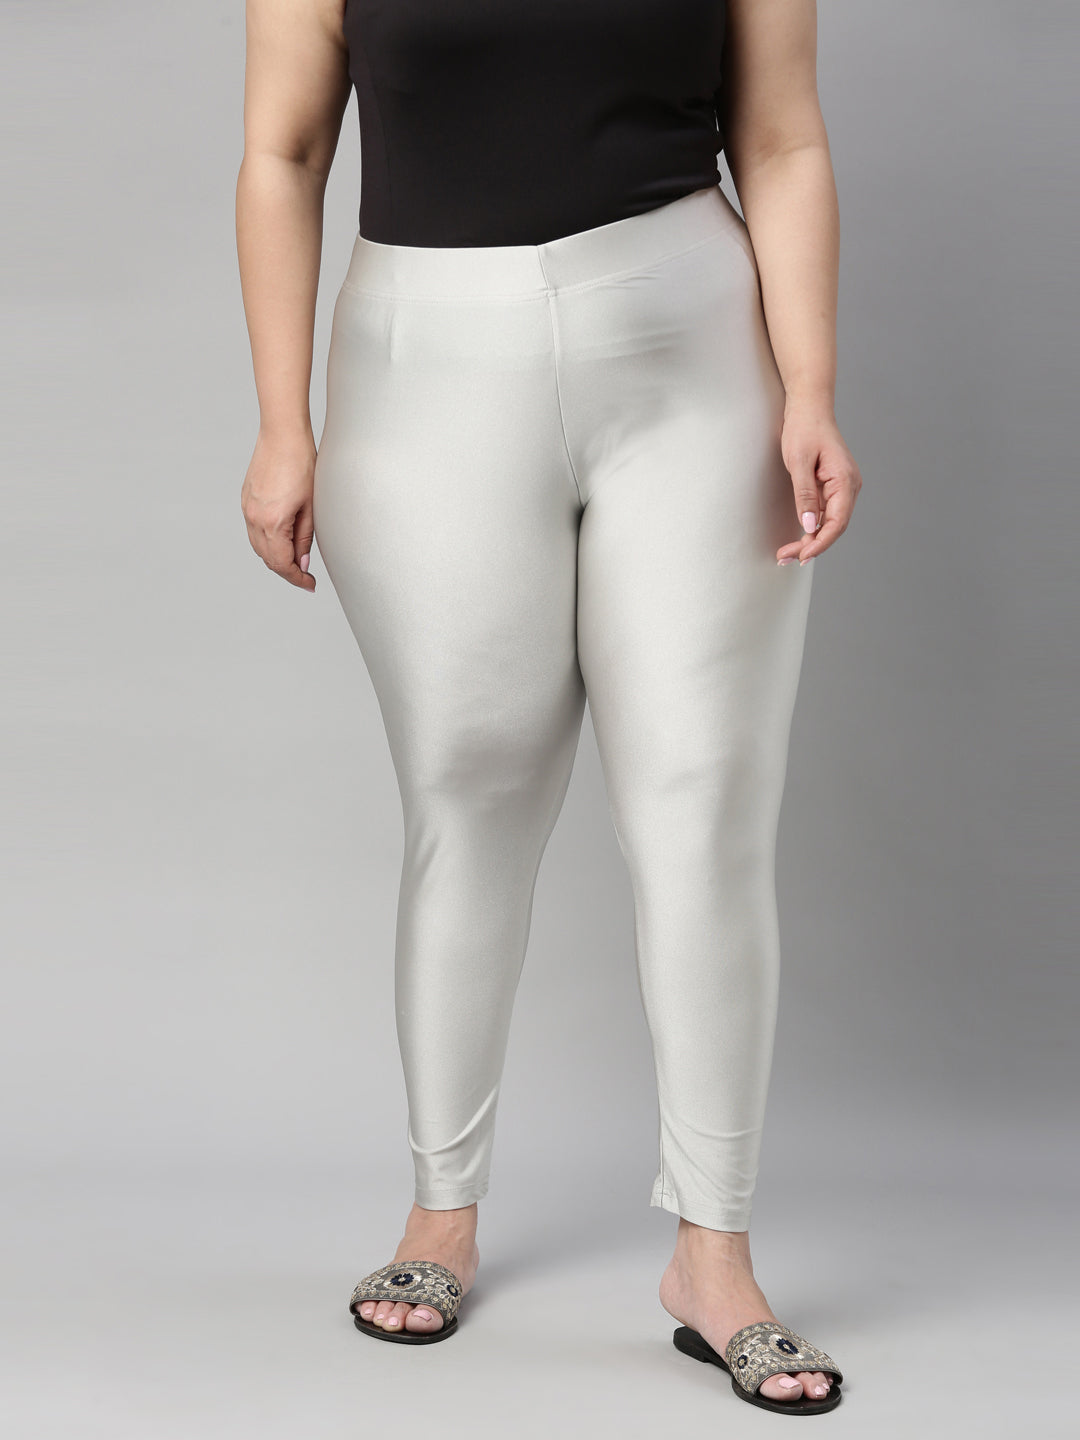 Buy Silver Solid Shimmer Leggings Online at Best Price - Clora Creation